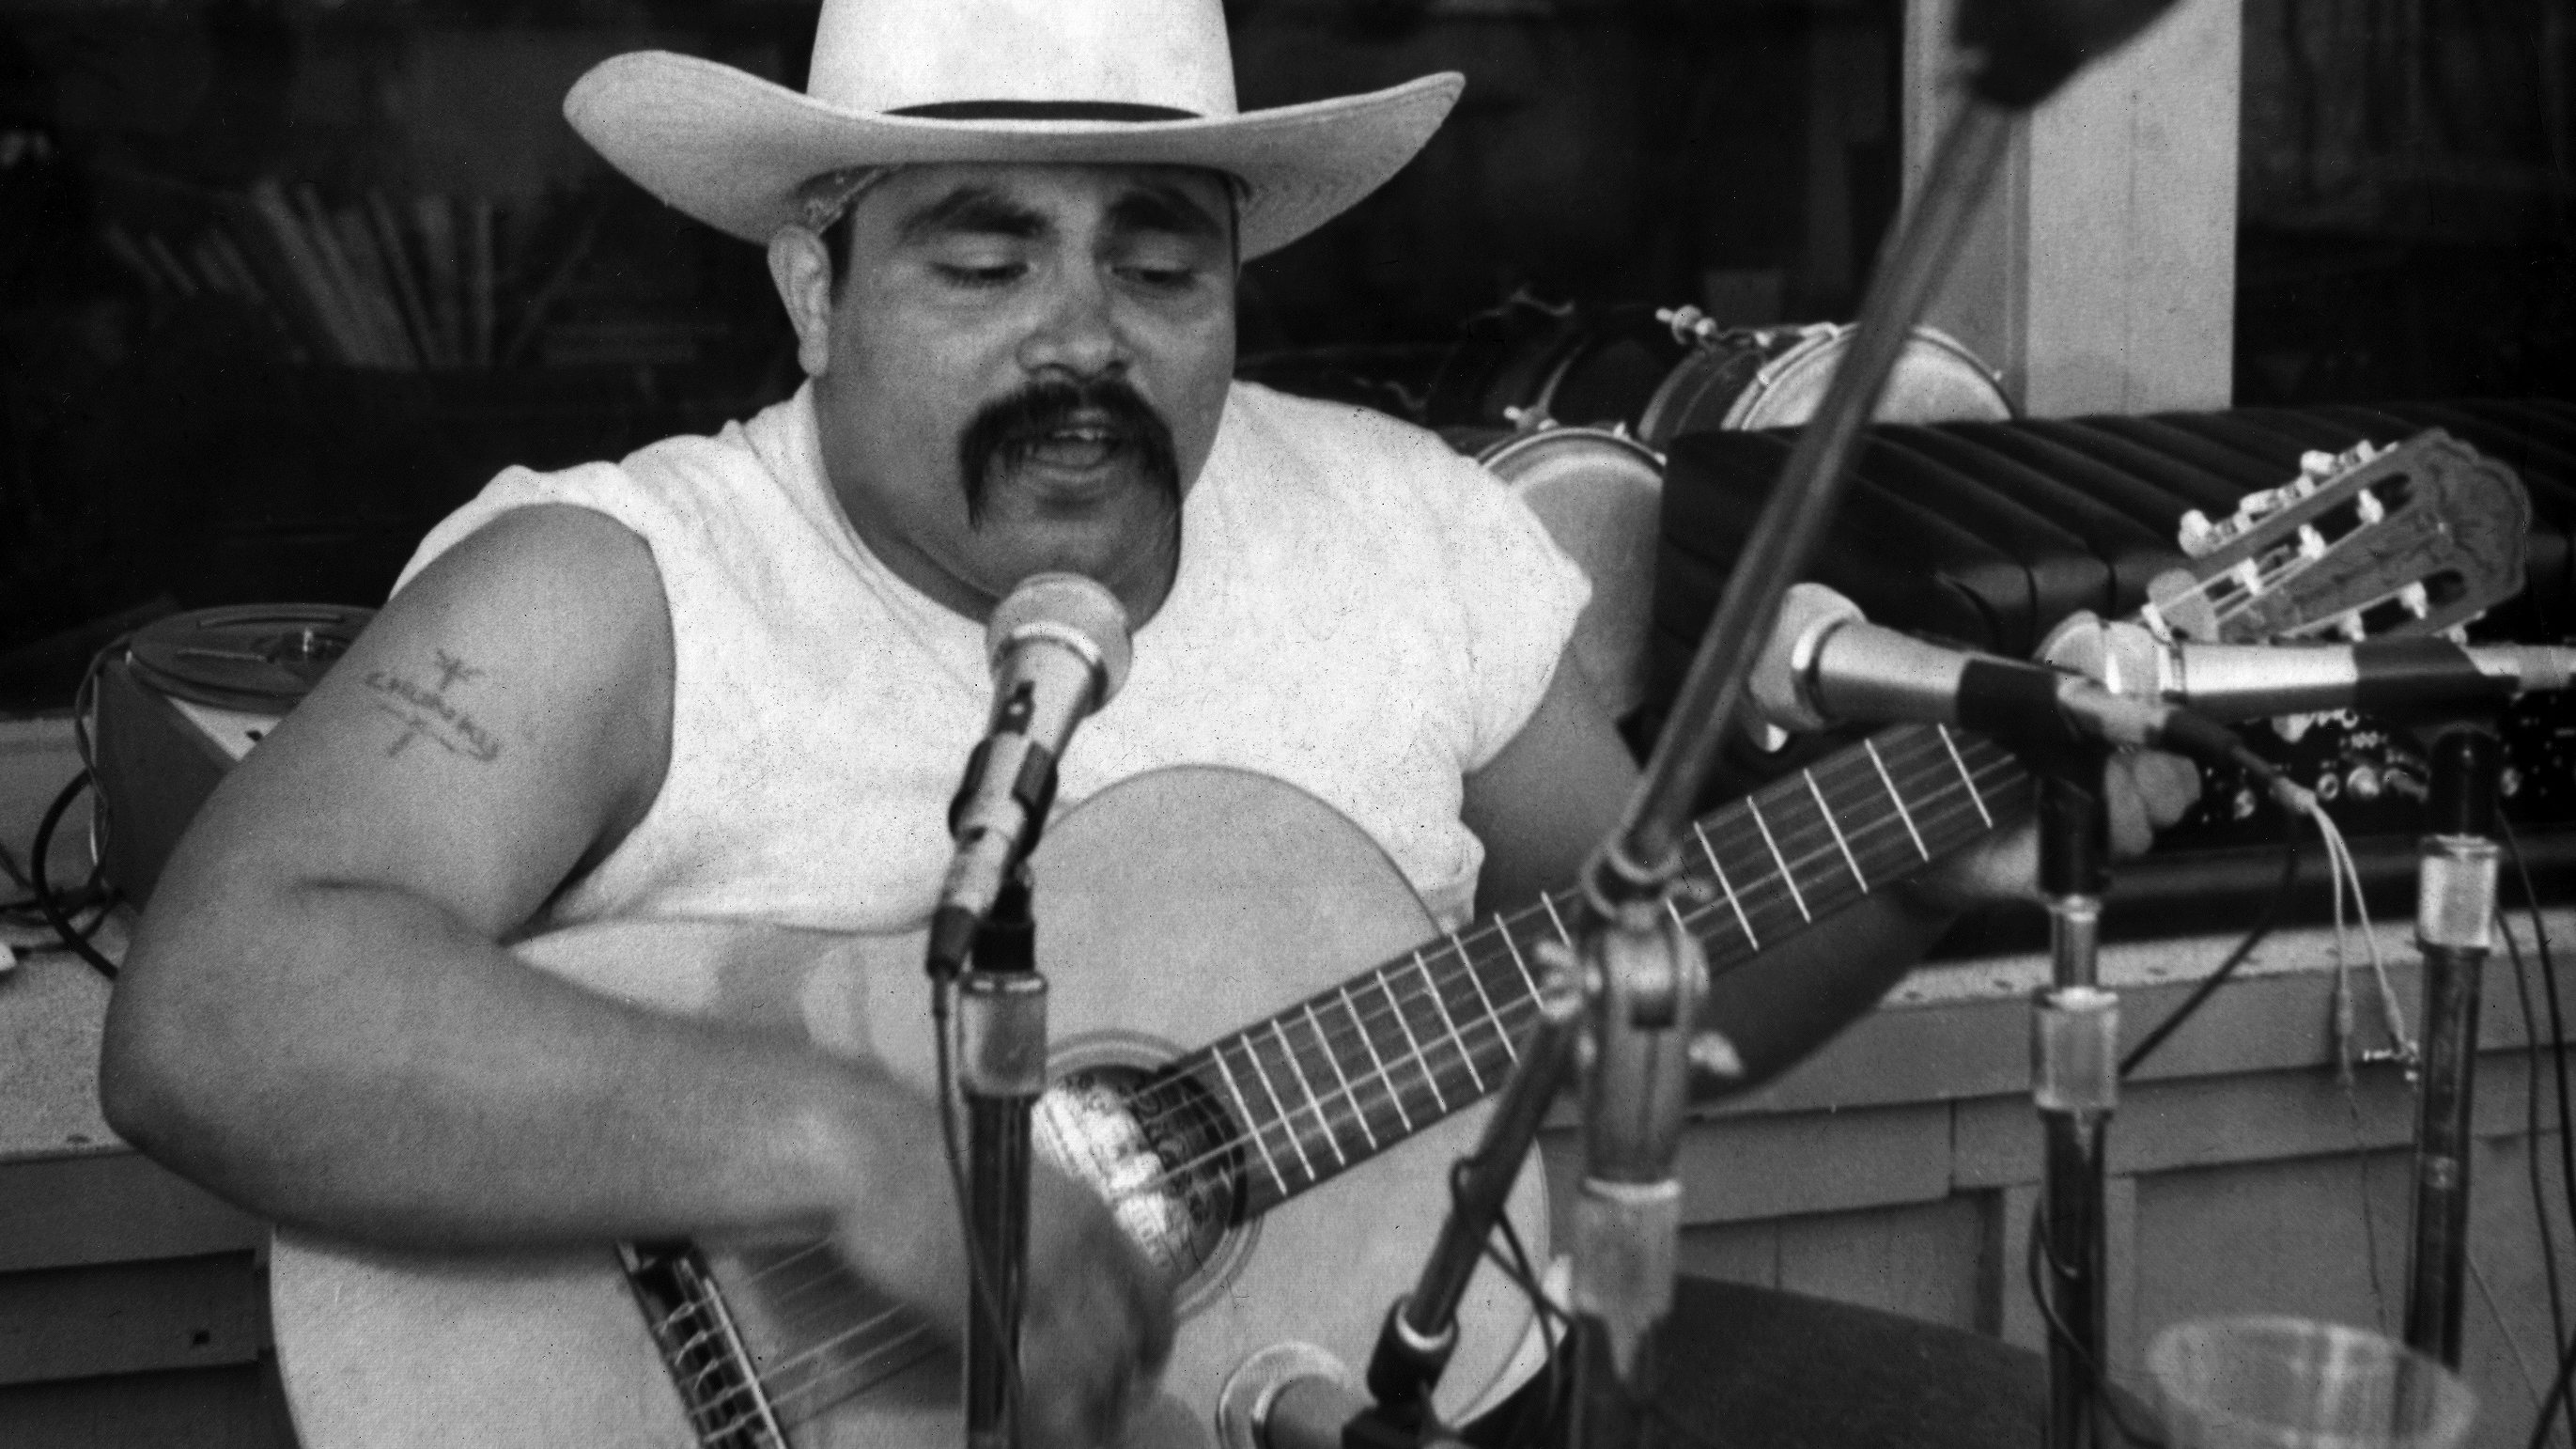 Ramon “Chunky” Sanchez singing with his guitar at microphone, ca 1974. Photo courtesy of Ramon “Chunky” Sanchez.